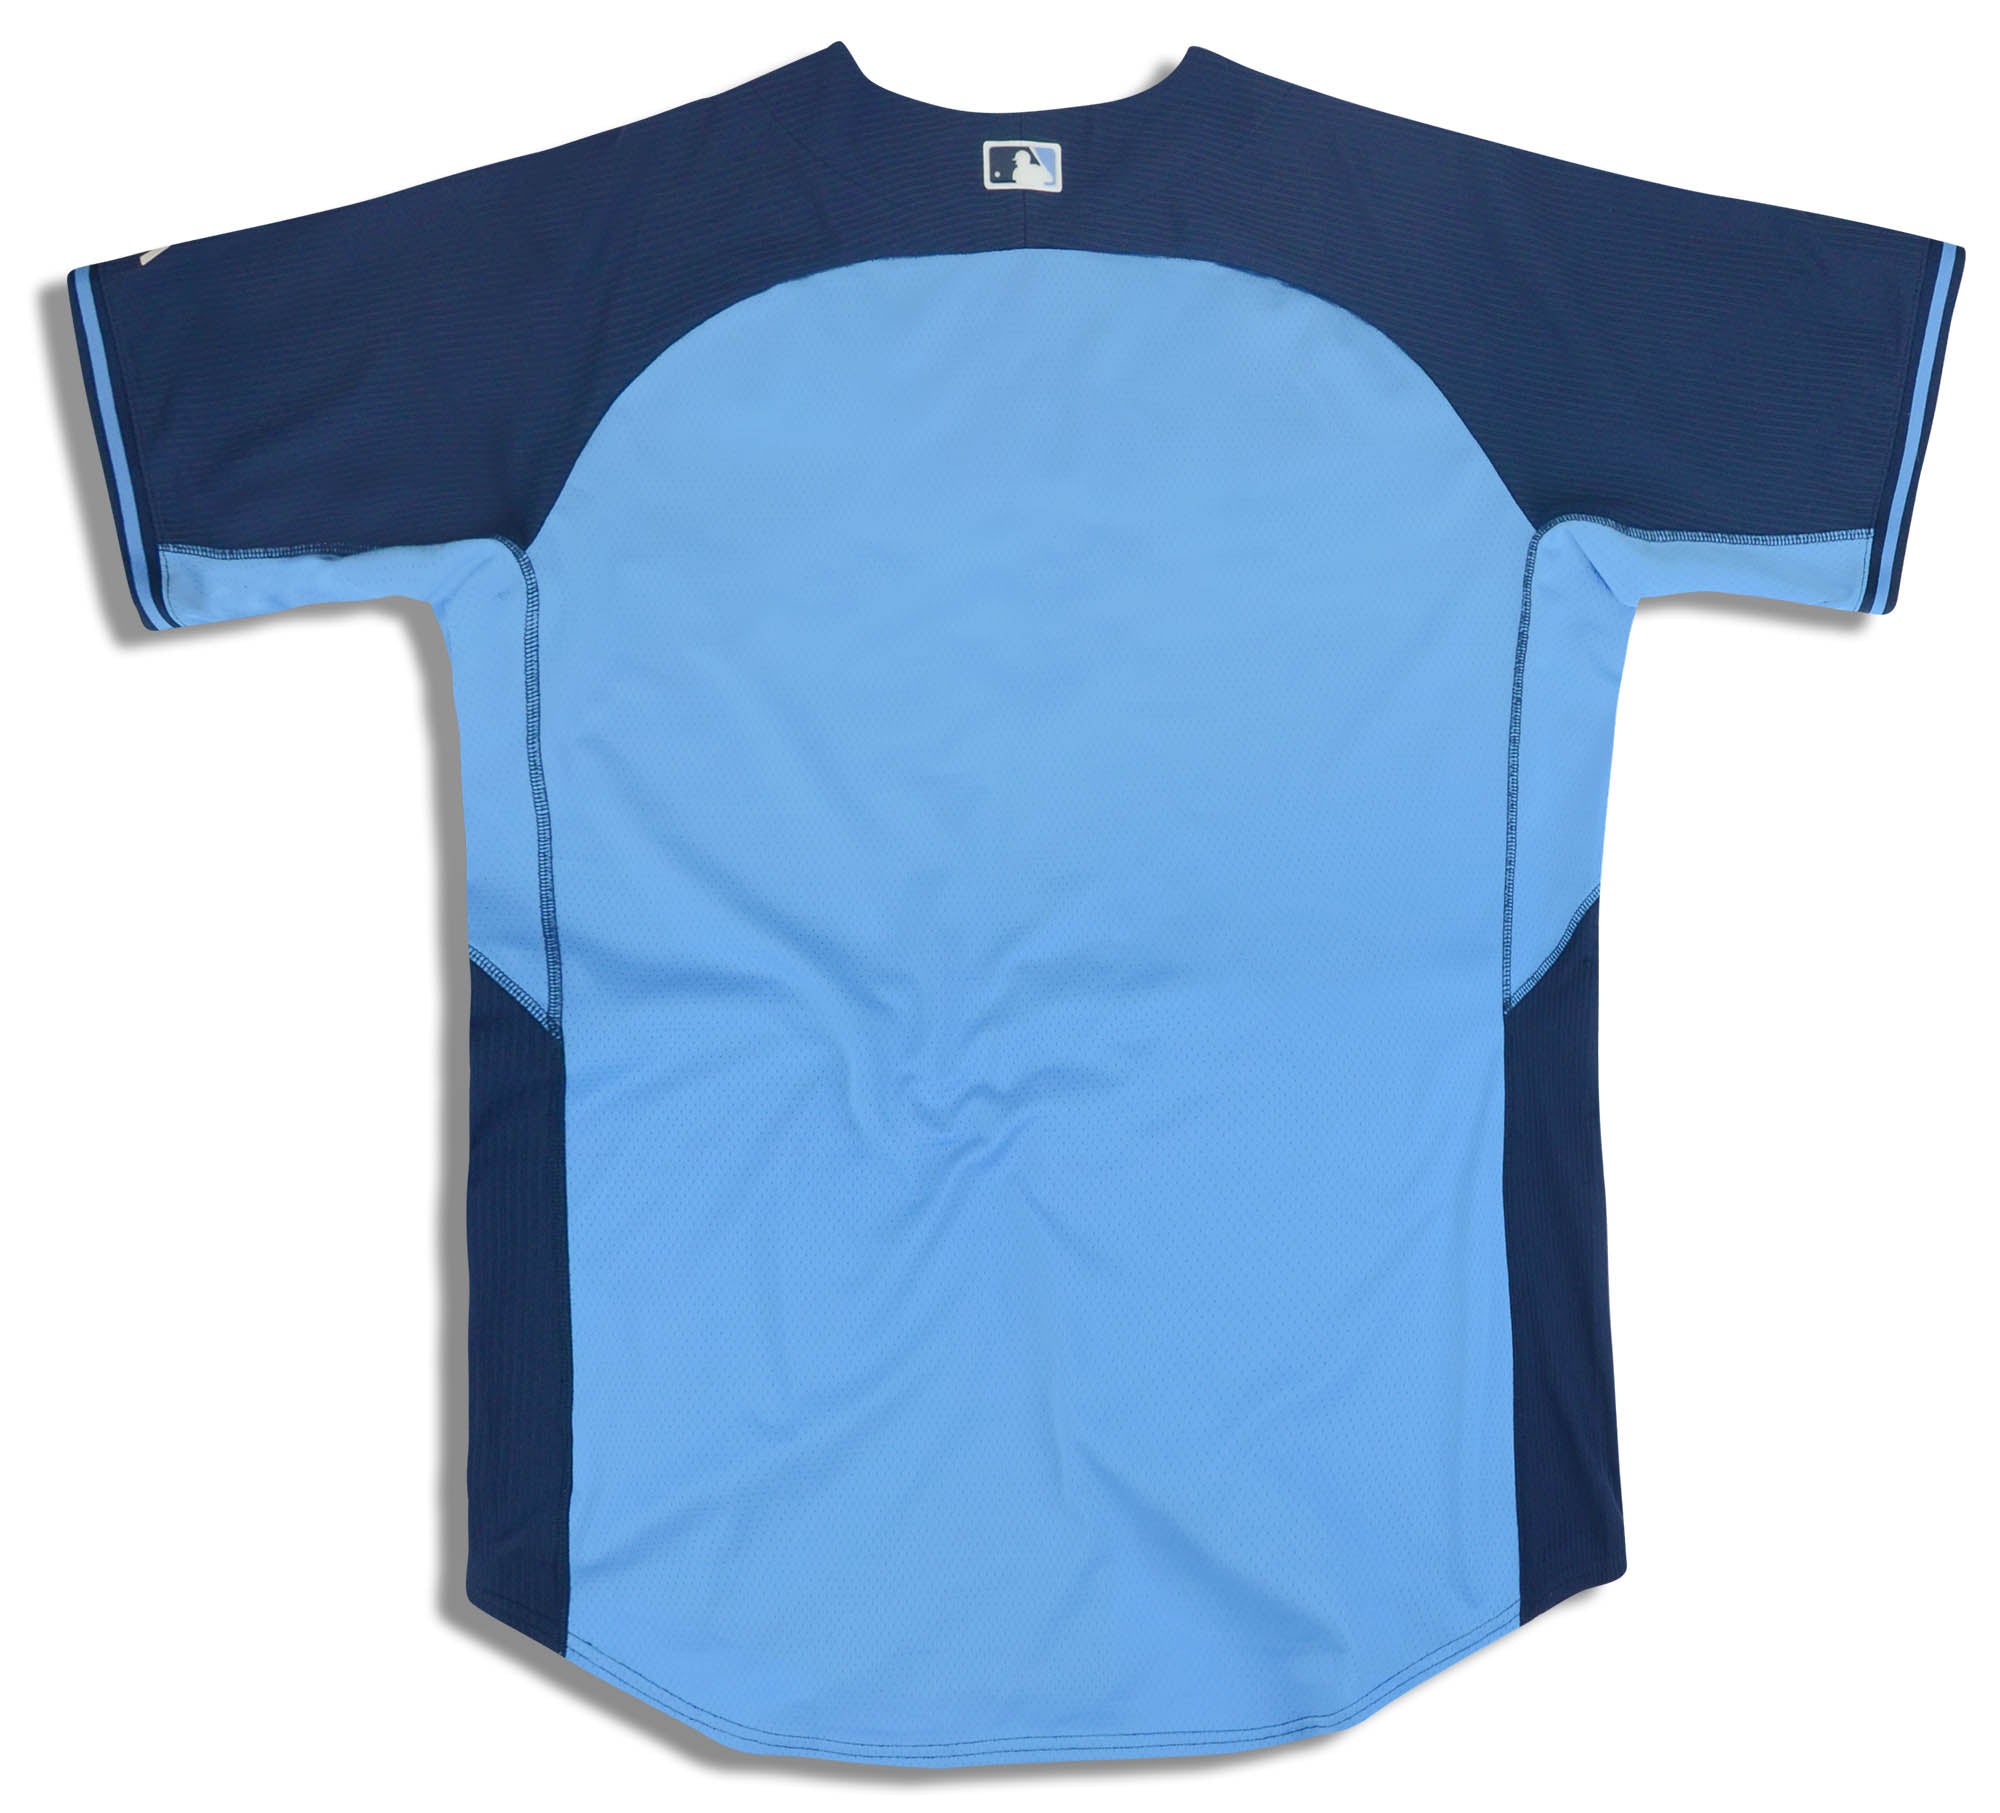 Tampa Bay Rays Throwback jersey….from the 70s?